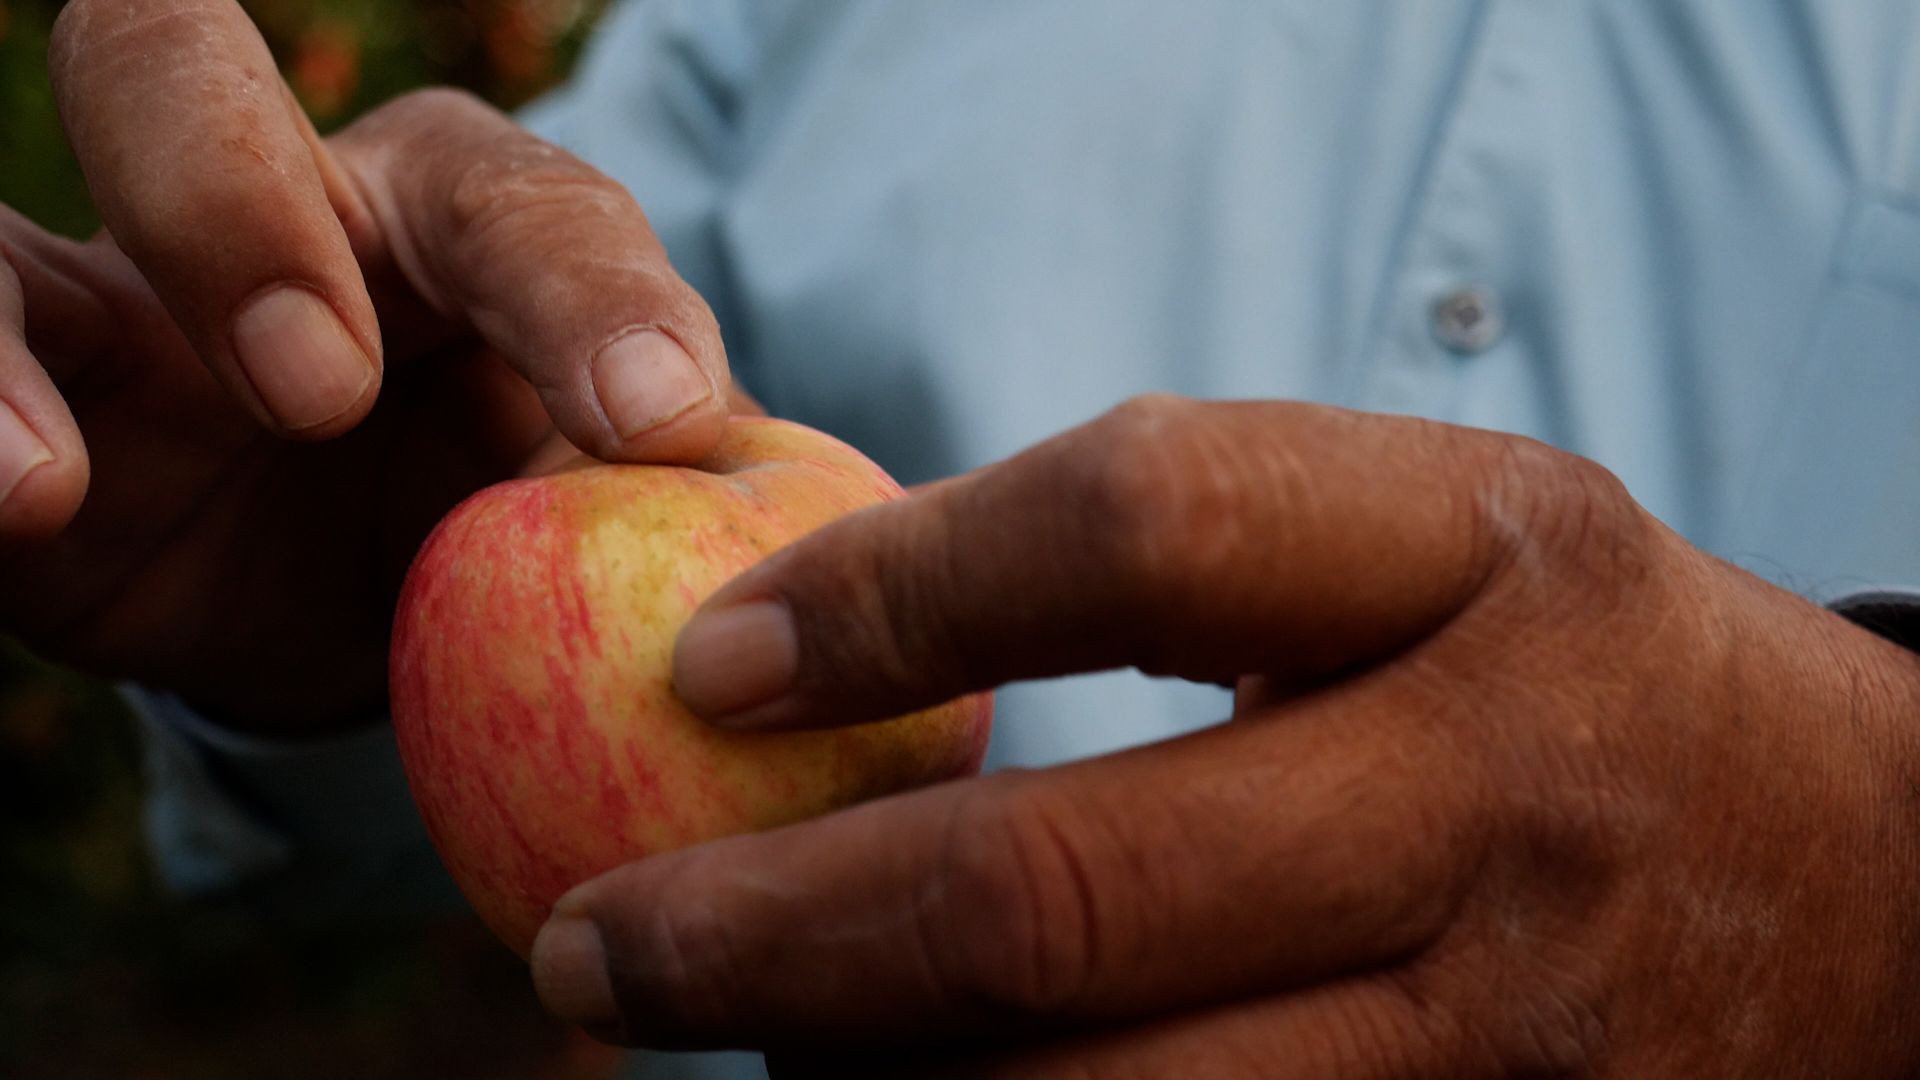 A close up of hands holding an apple